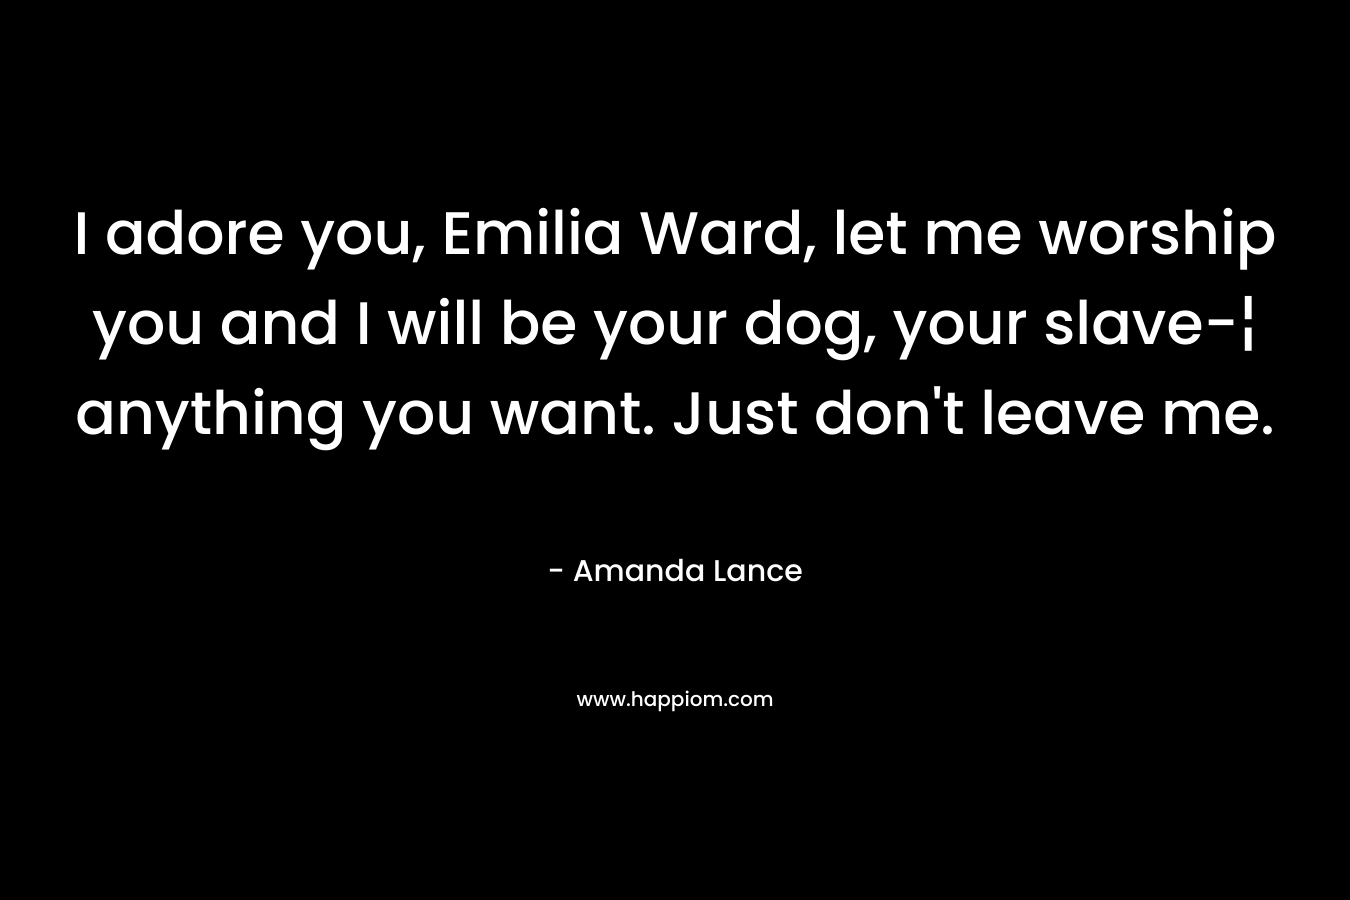 I adore you, Emilia Ward, let me worship you and I will be your dog, your slave-¦ anything you want. Just don’t leave me. – Amanda Lance